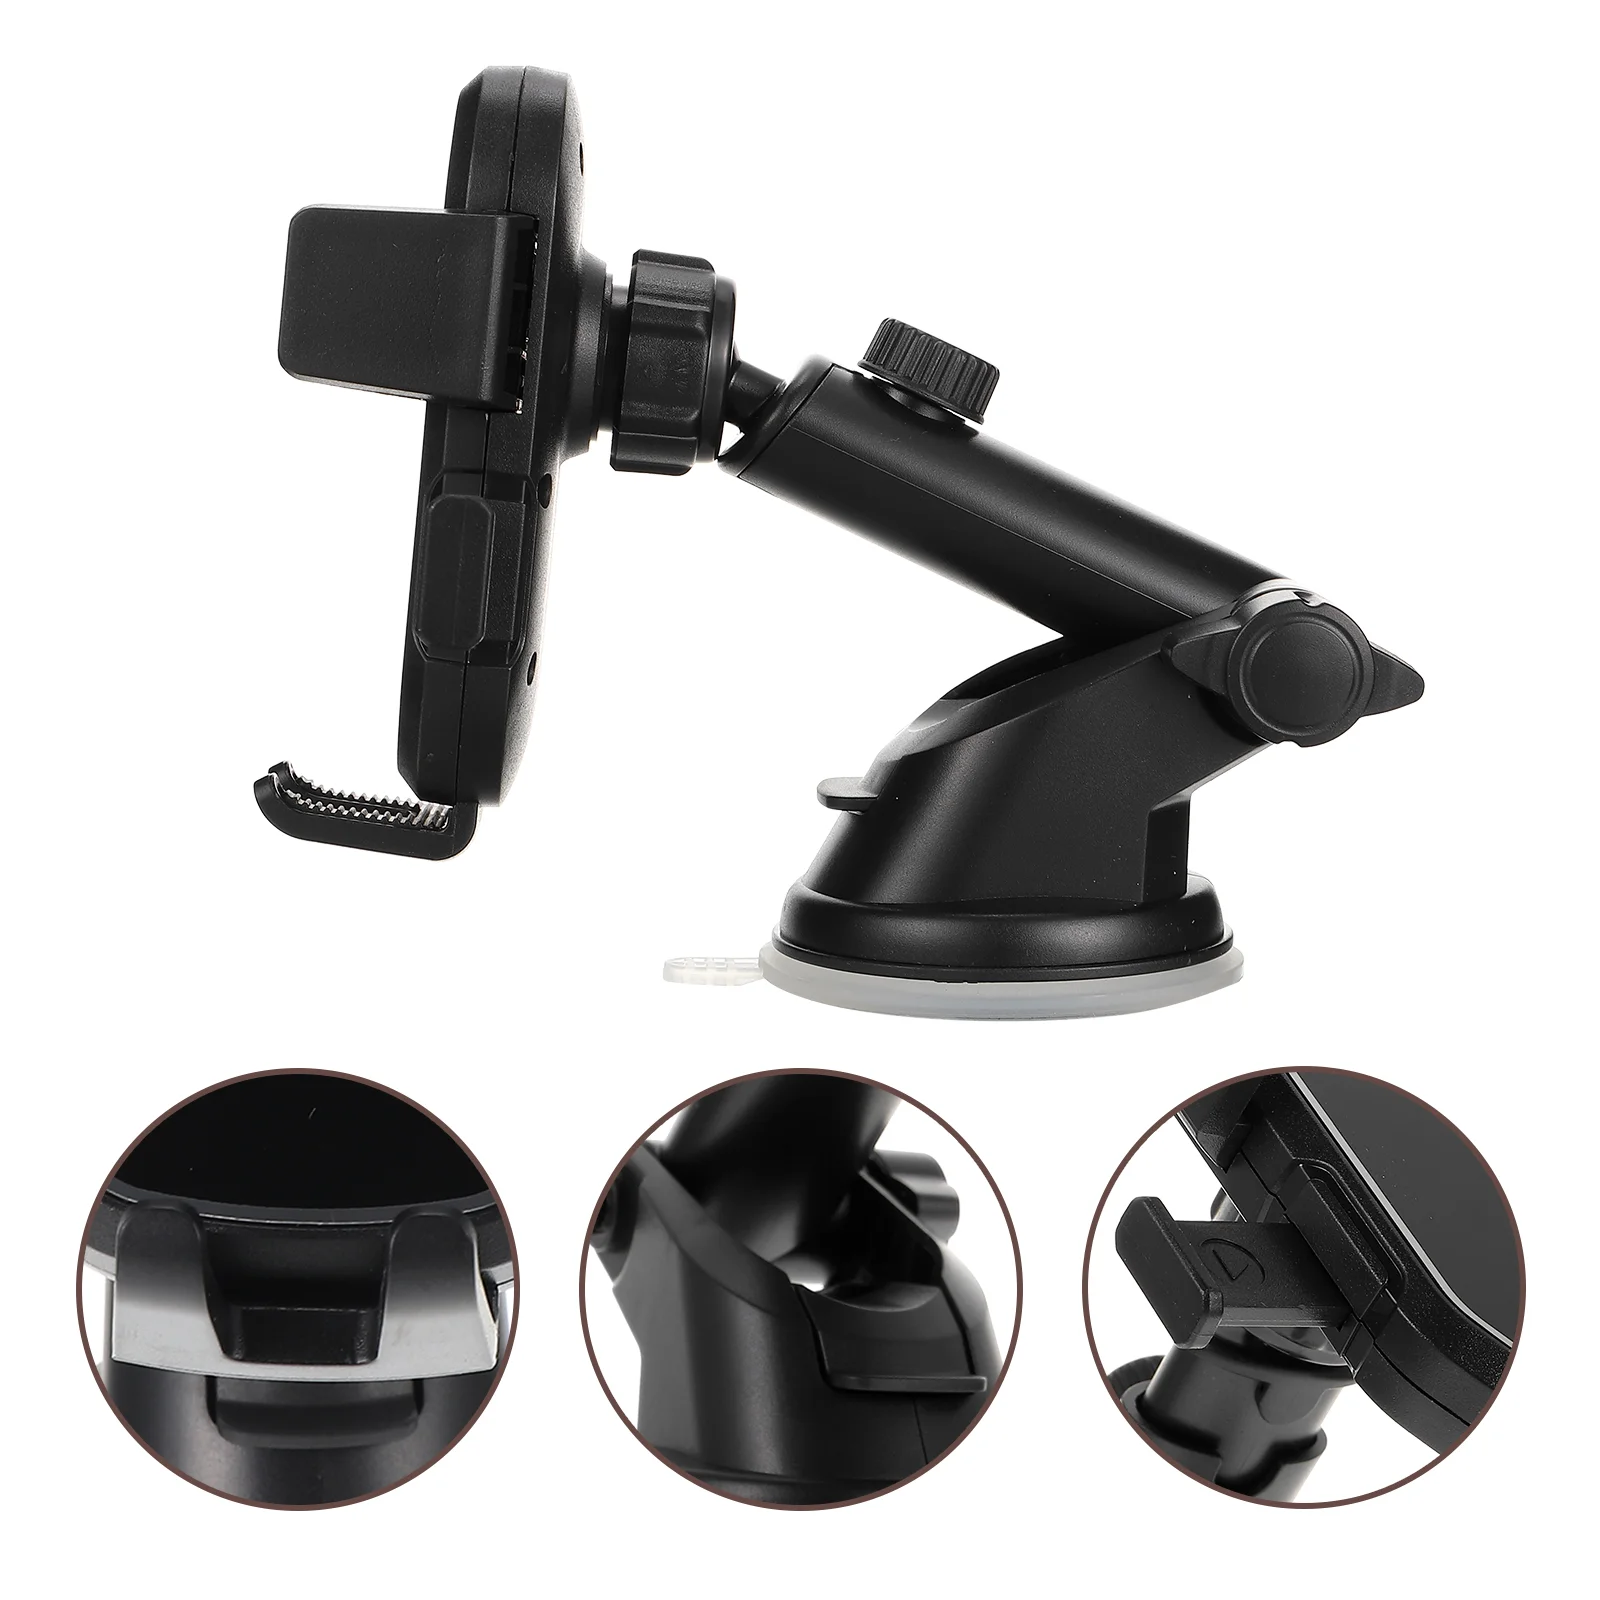 

Car Bracket Holder Mount Vent Rack Air Mobile Cell Dash Cradle Clampclip Using Stands Multifunctional Sucker Cupracks Suction